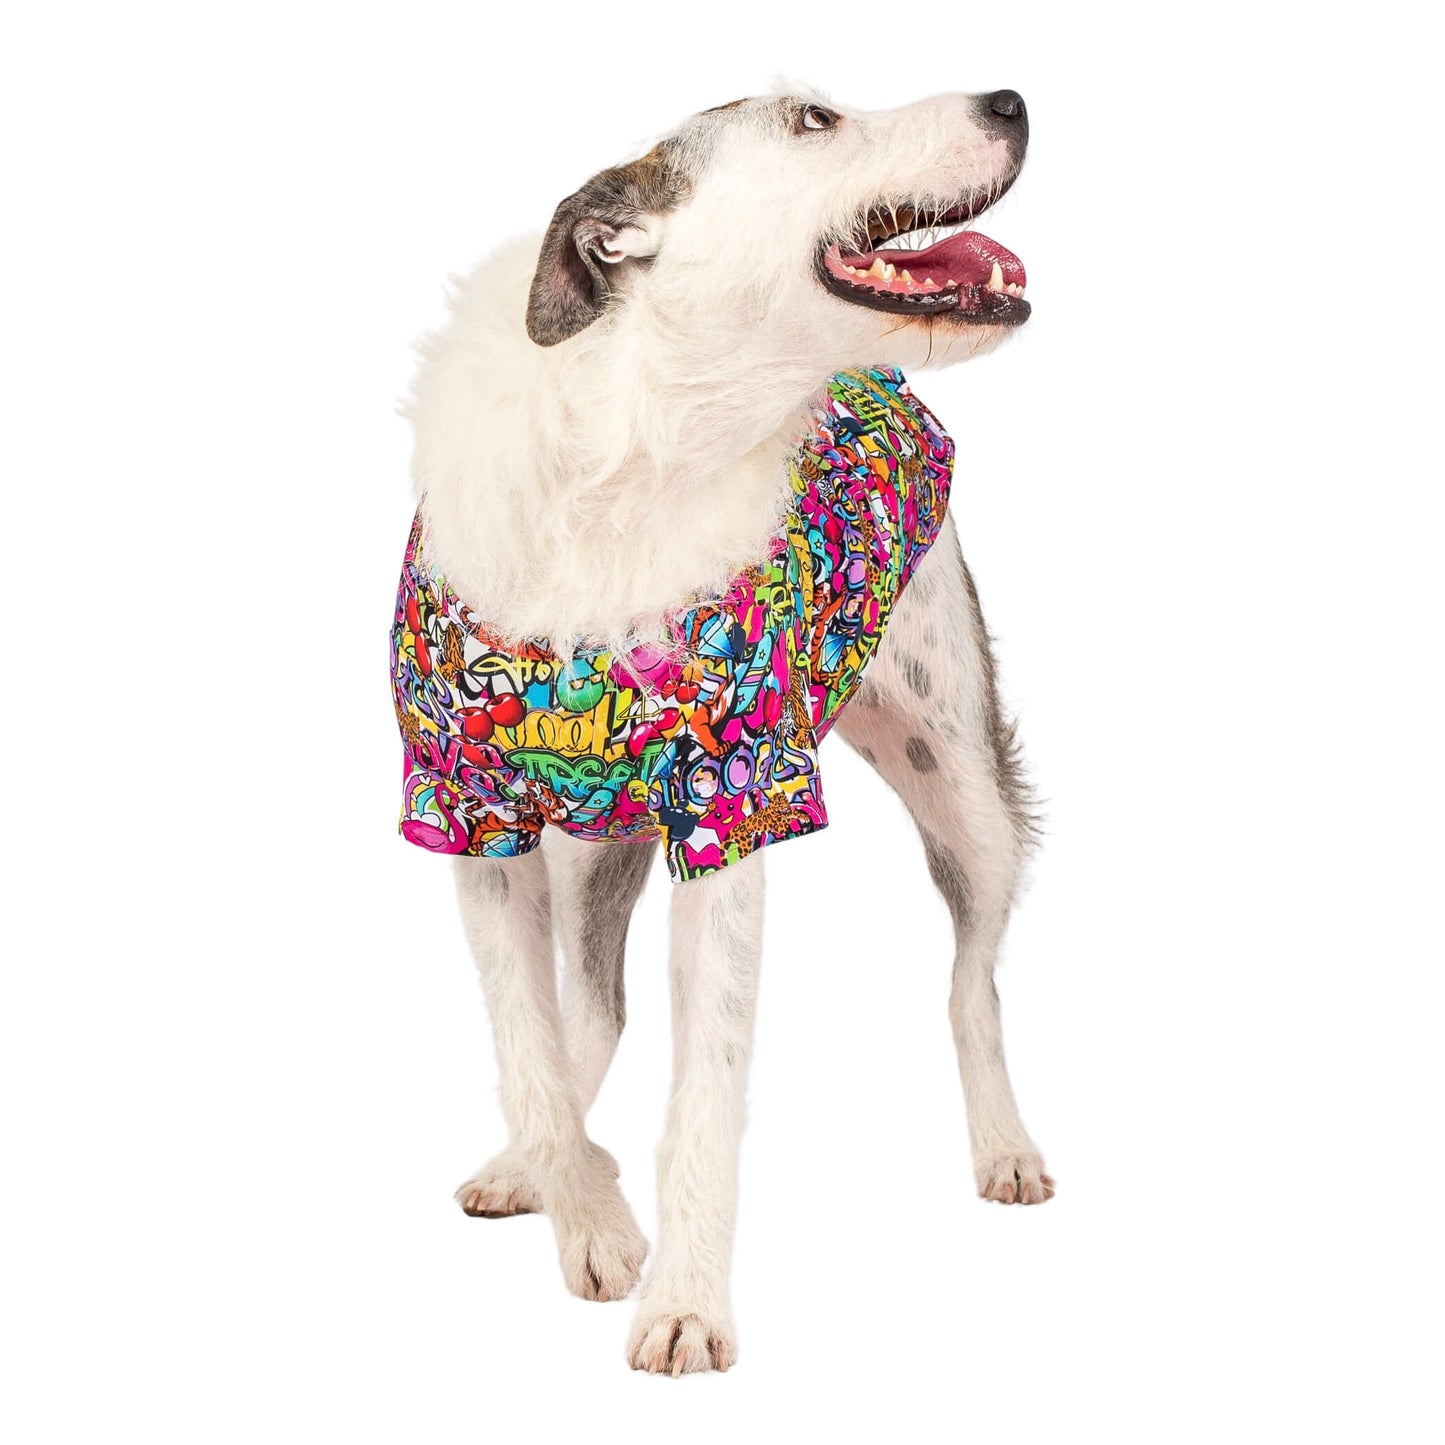 A dog standing wearing Vibrant Hound's Writting on the wall shirt for dogs. It is covered in a bright coloured graffiti print featuring Skate boards, lions, tigets and flamingos.